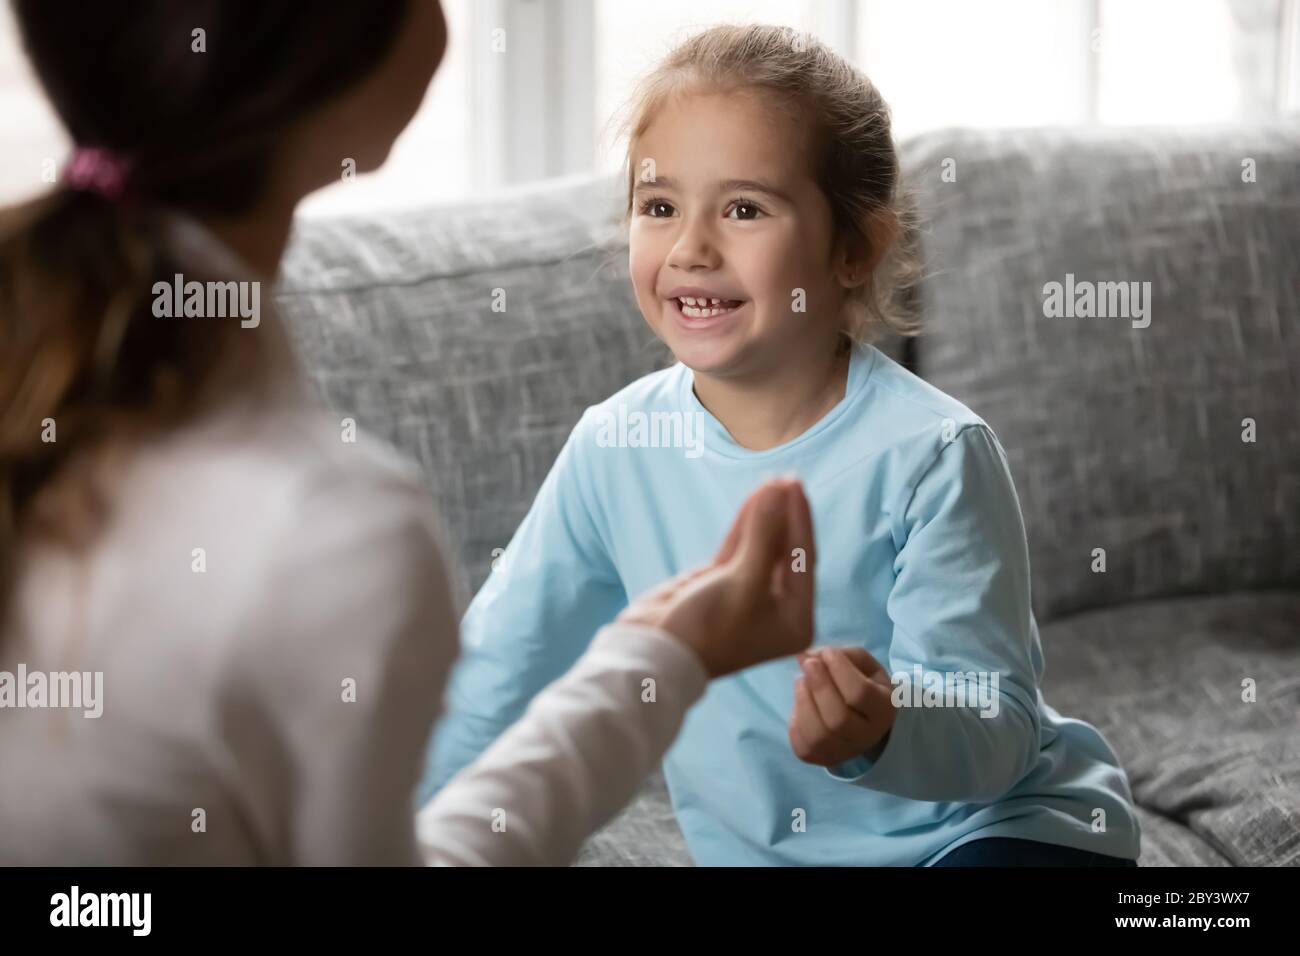 Little girl make hand gesture learn sign language with mom Stock Photo